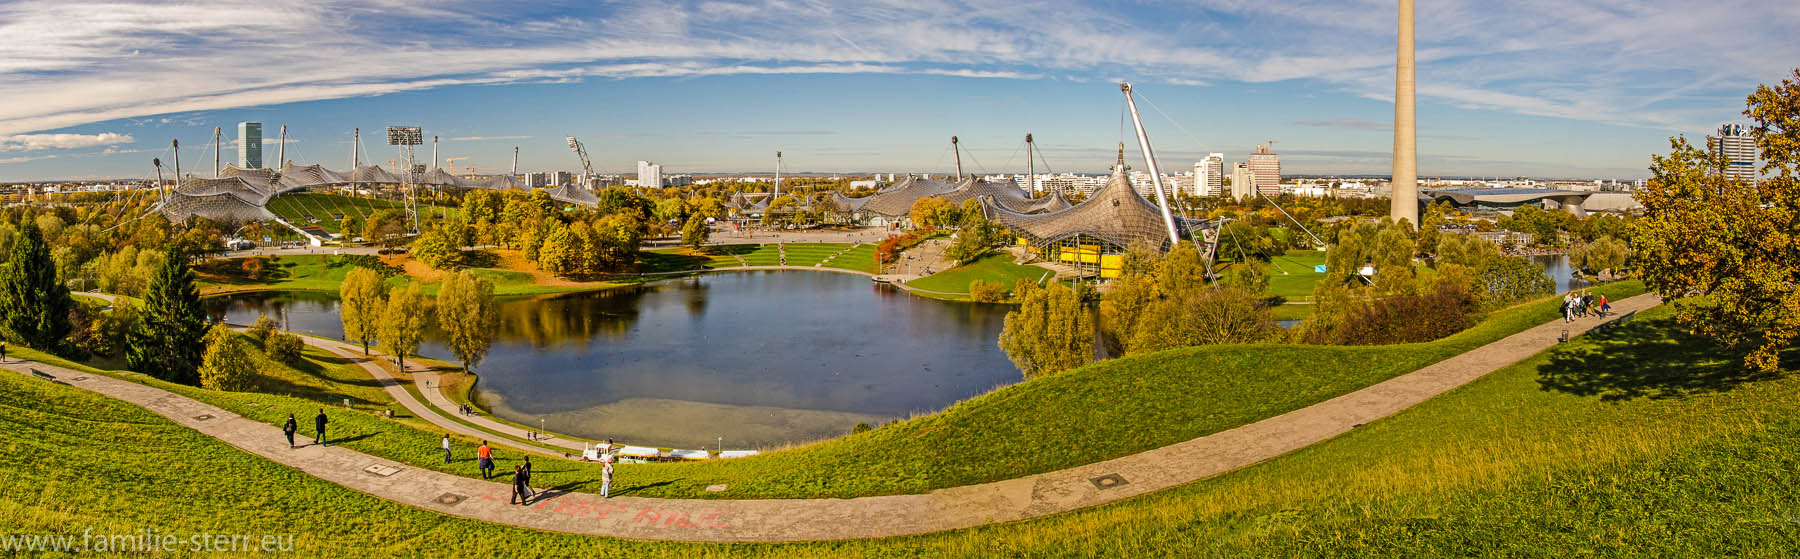 Olympiapark München - Panorama | Familie Sterr